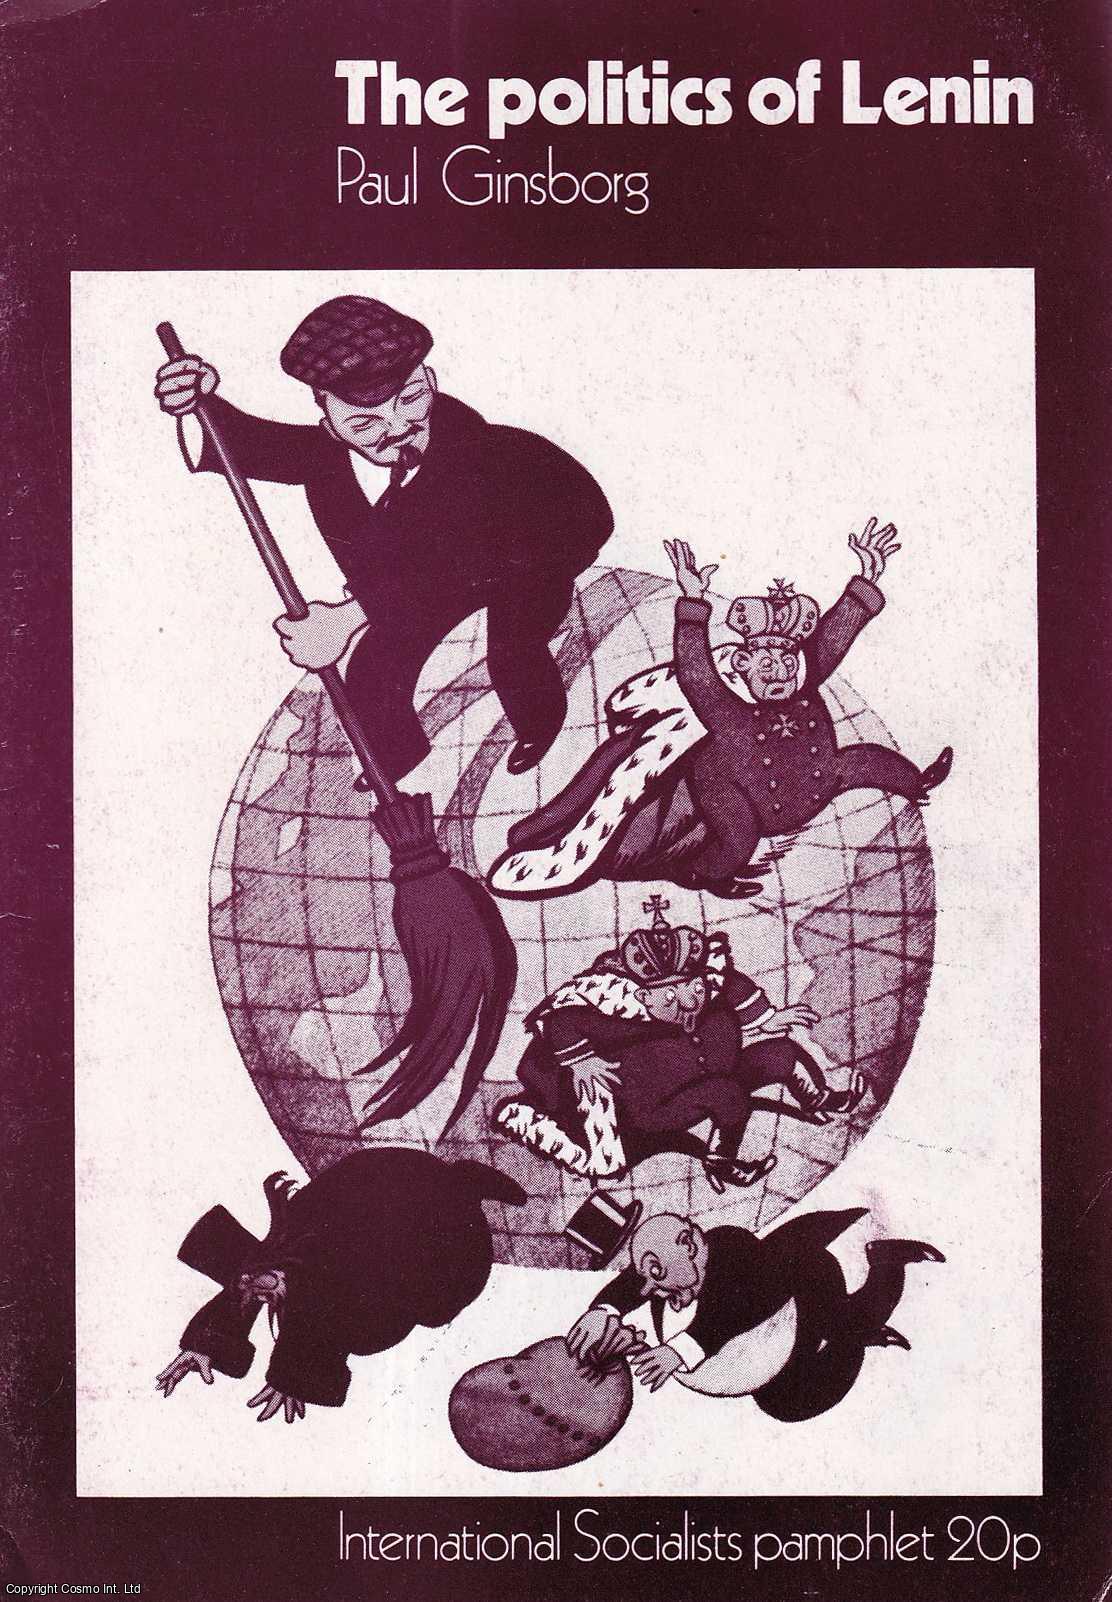 Paul Ginsborg - The Politics of Lenin. An International Socialists Pamphlet. Published by International Socialists 1974.